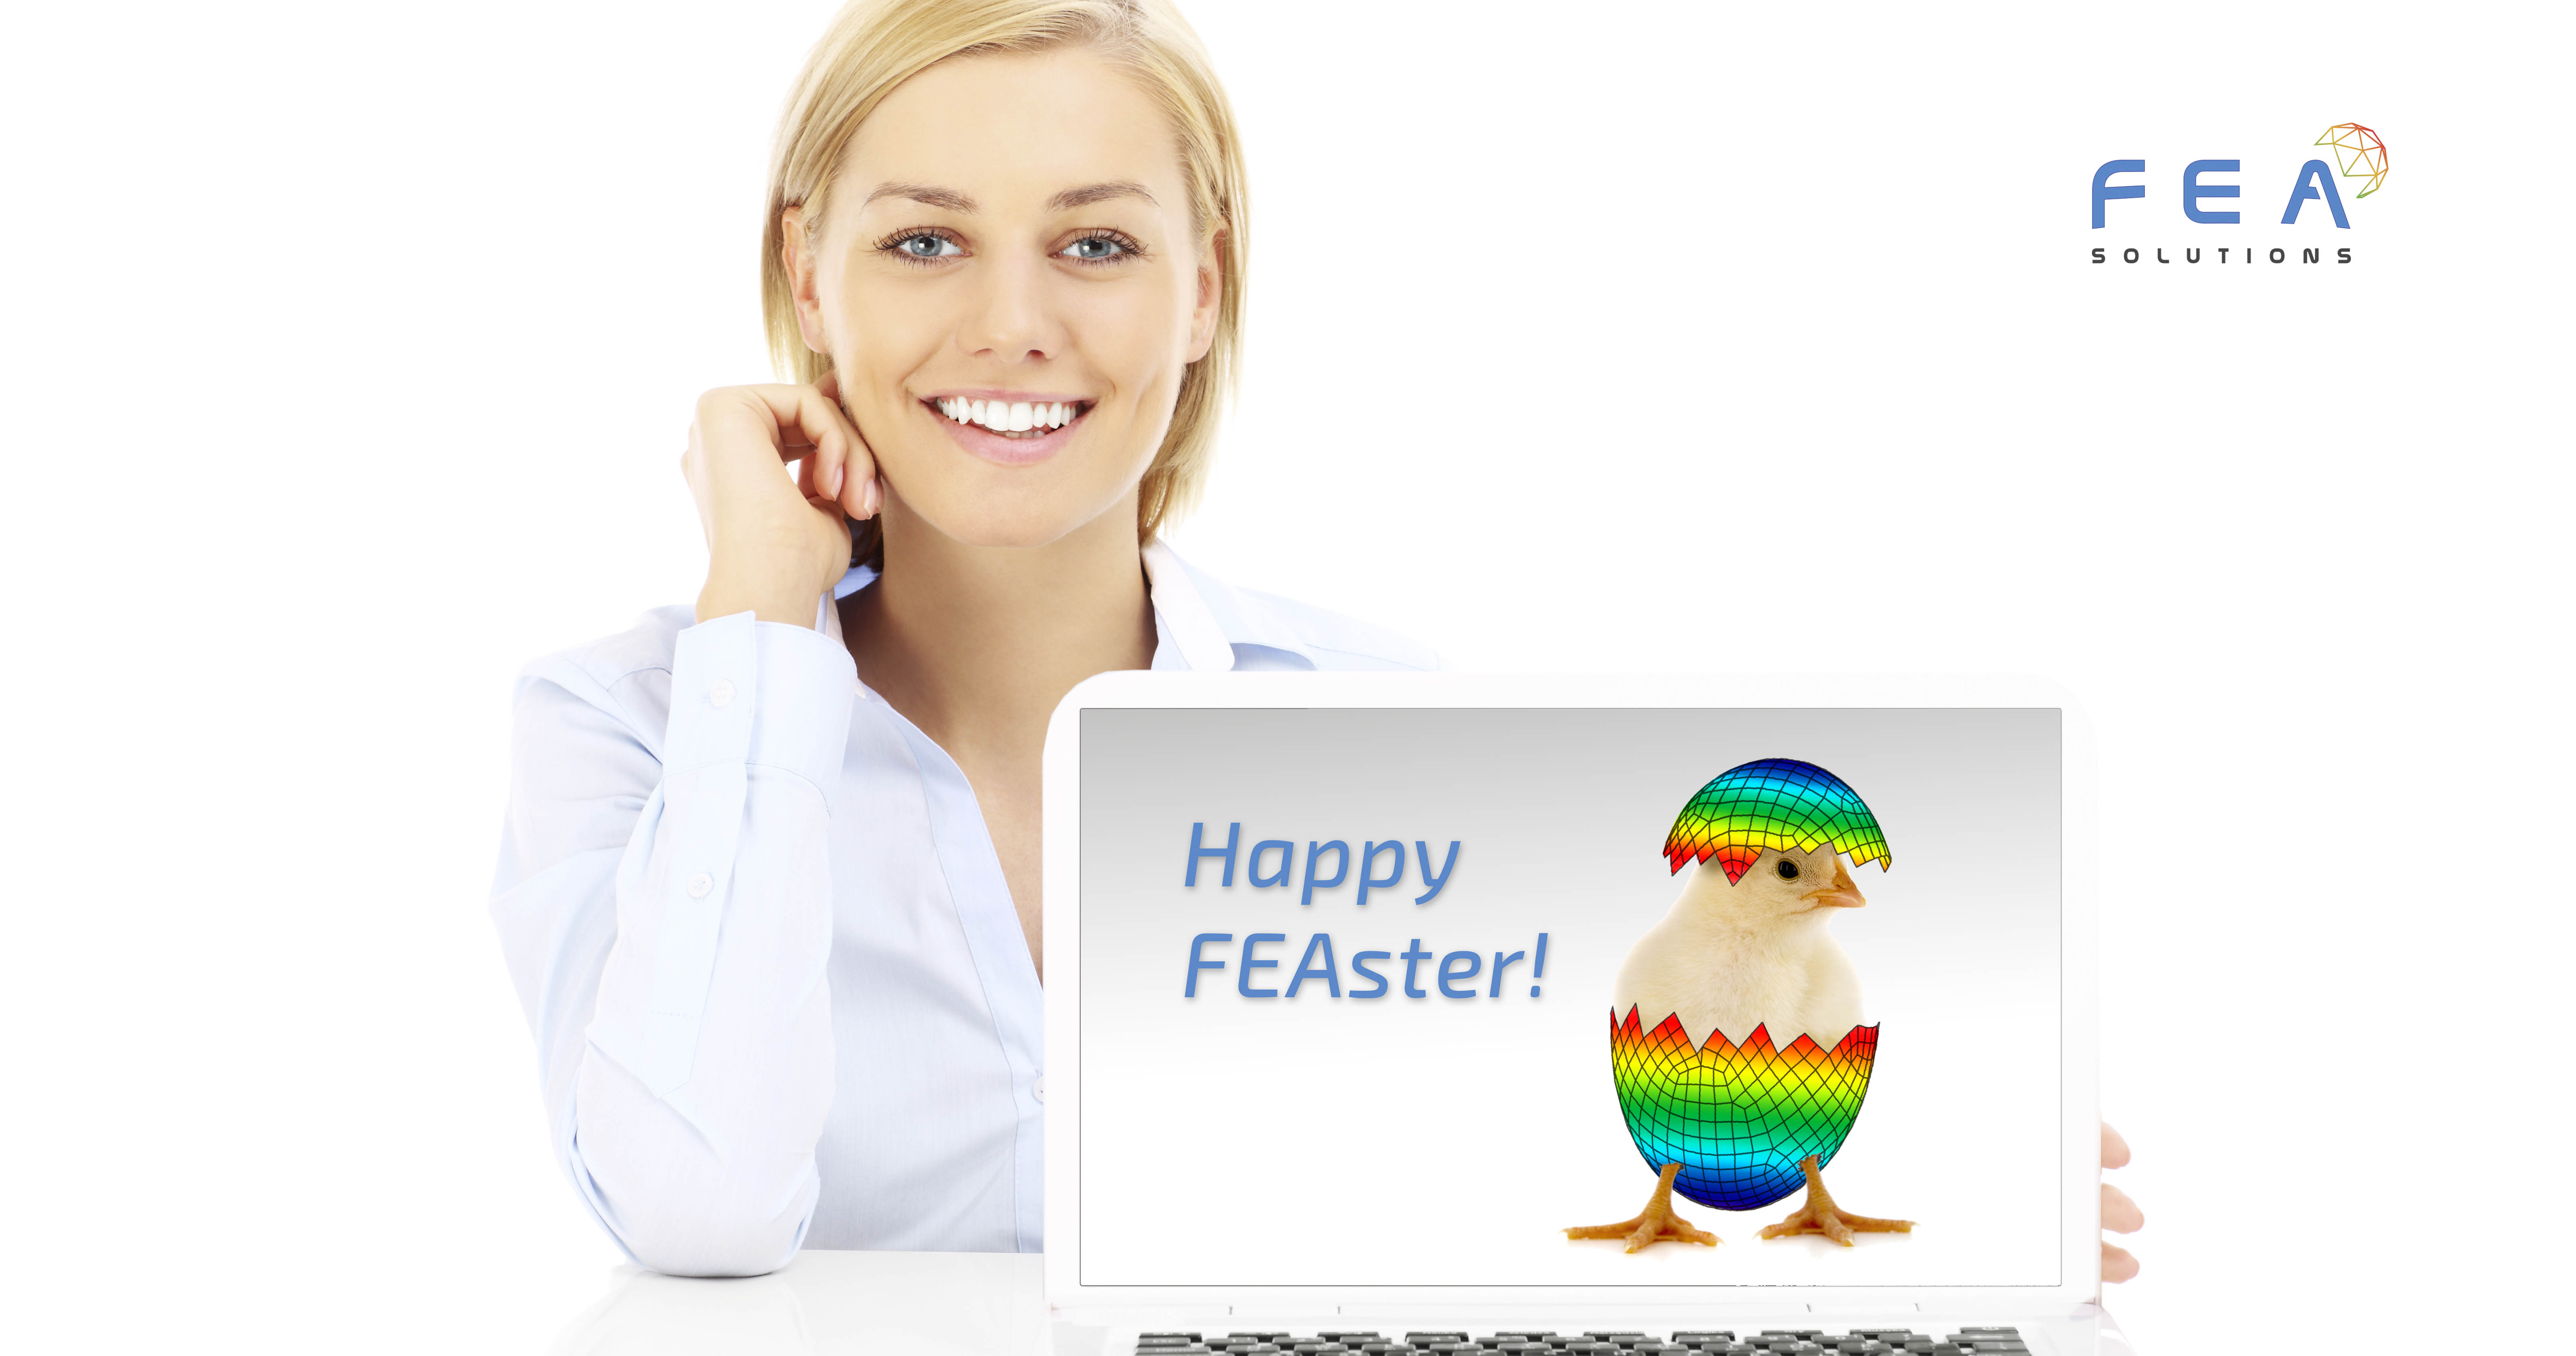 happy FEAster from FEA solutions